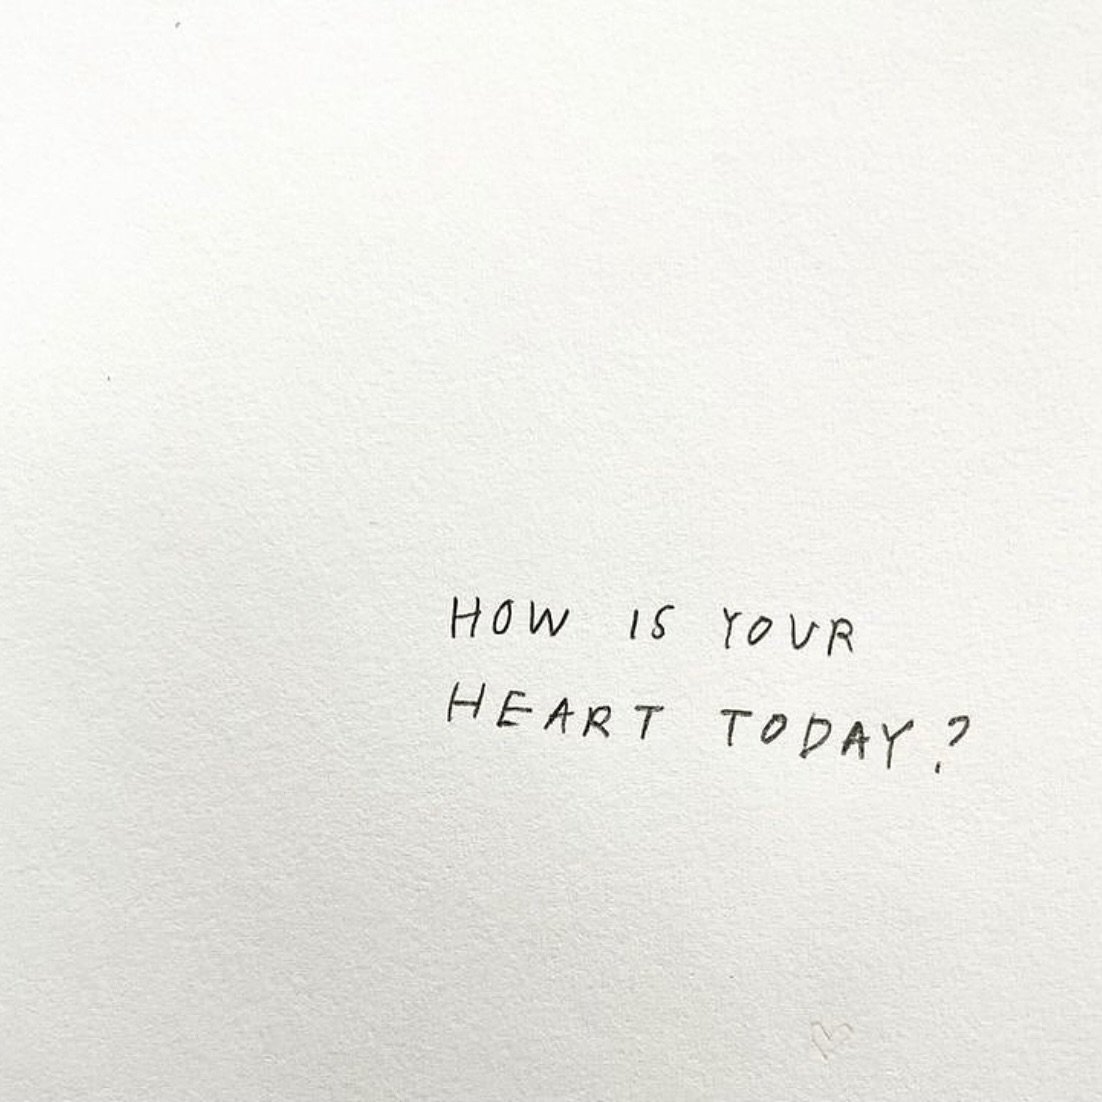 How is your heart today ?